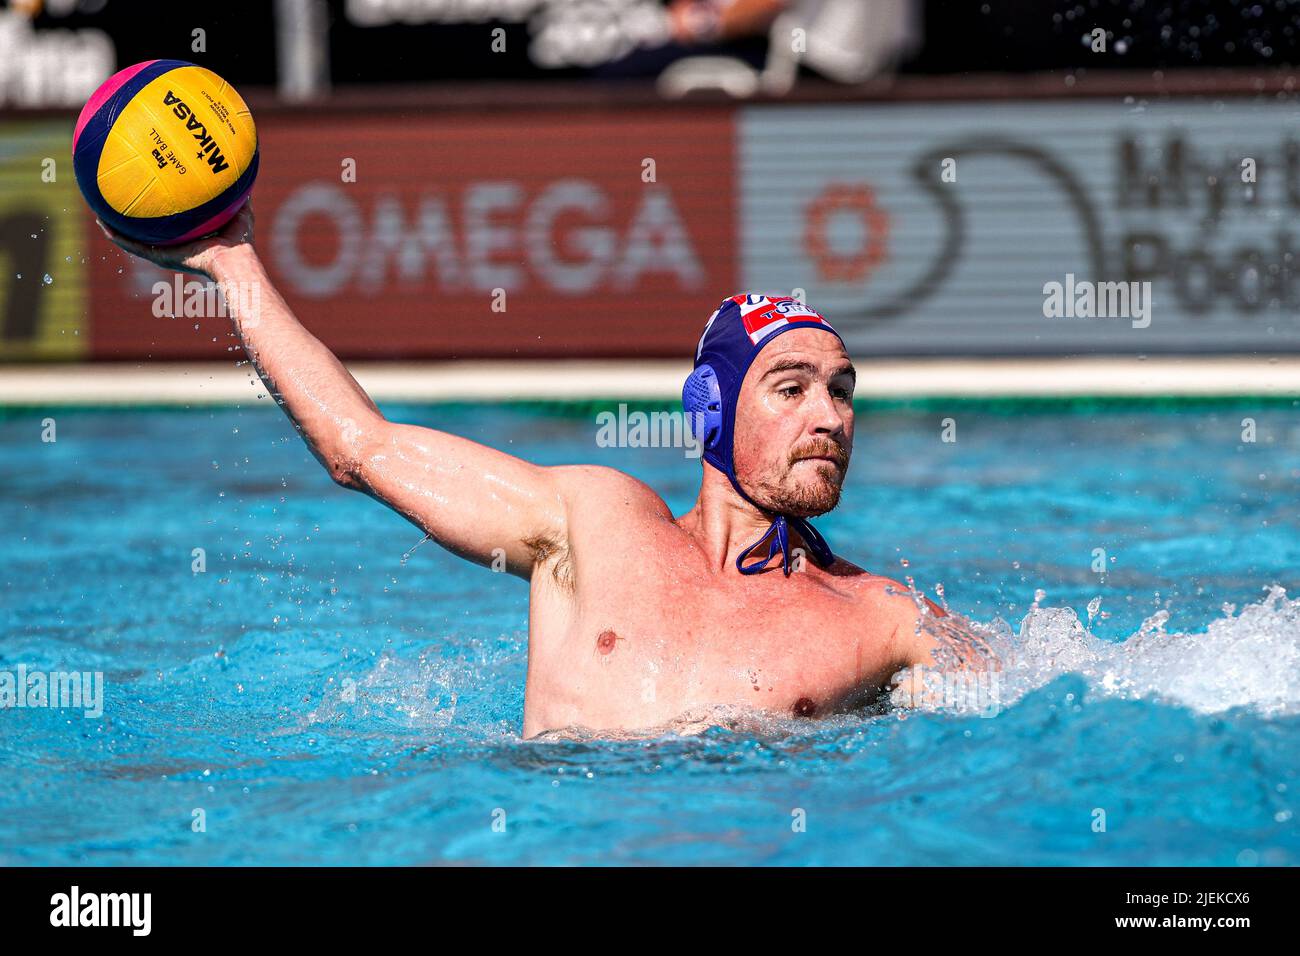 BUDAPEST, HUNGARY - JUNE 27: Ante Vukicevic of Croatia during the FINA World Championships Budapest 2022 1/8 finals match between Georgia and Croatia on June 27, 2022 in Budapest, Hungary (Photo by Albert ten Hove/Orange Pictures) Stock Photo